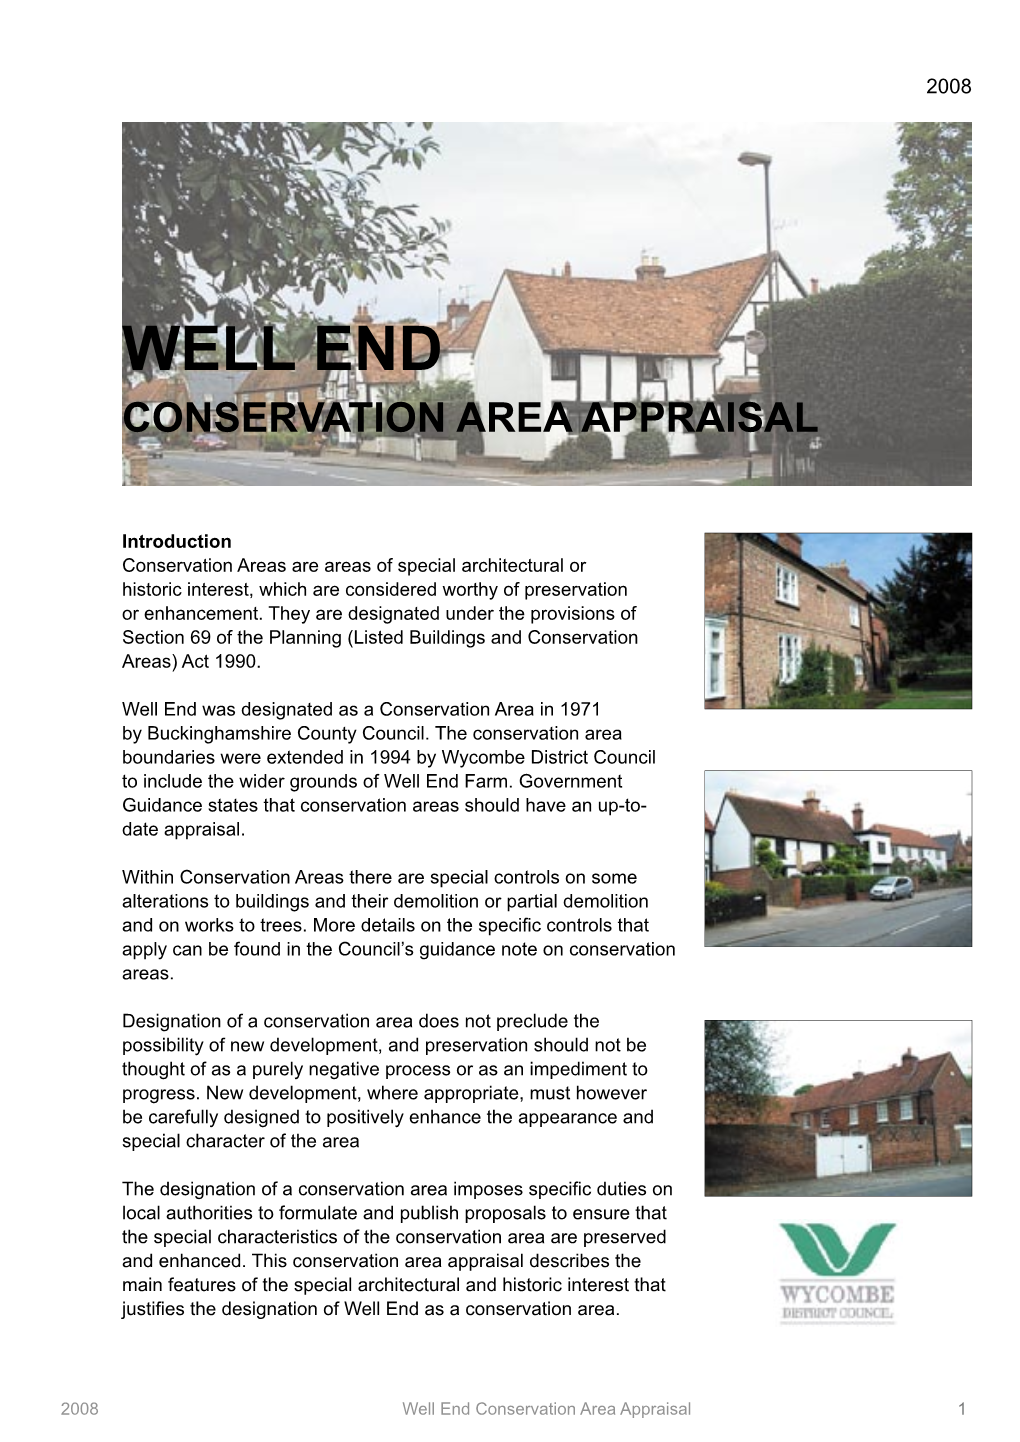 Well End Conservation Area Appraisal